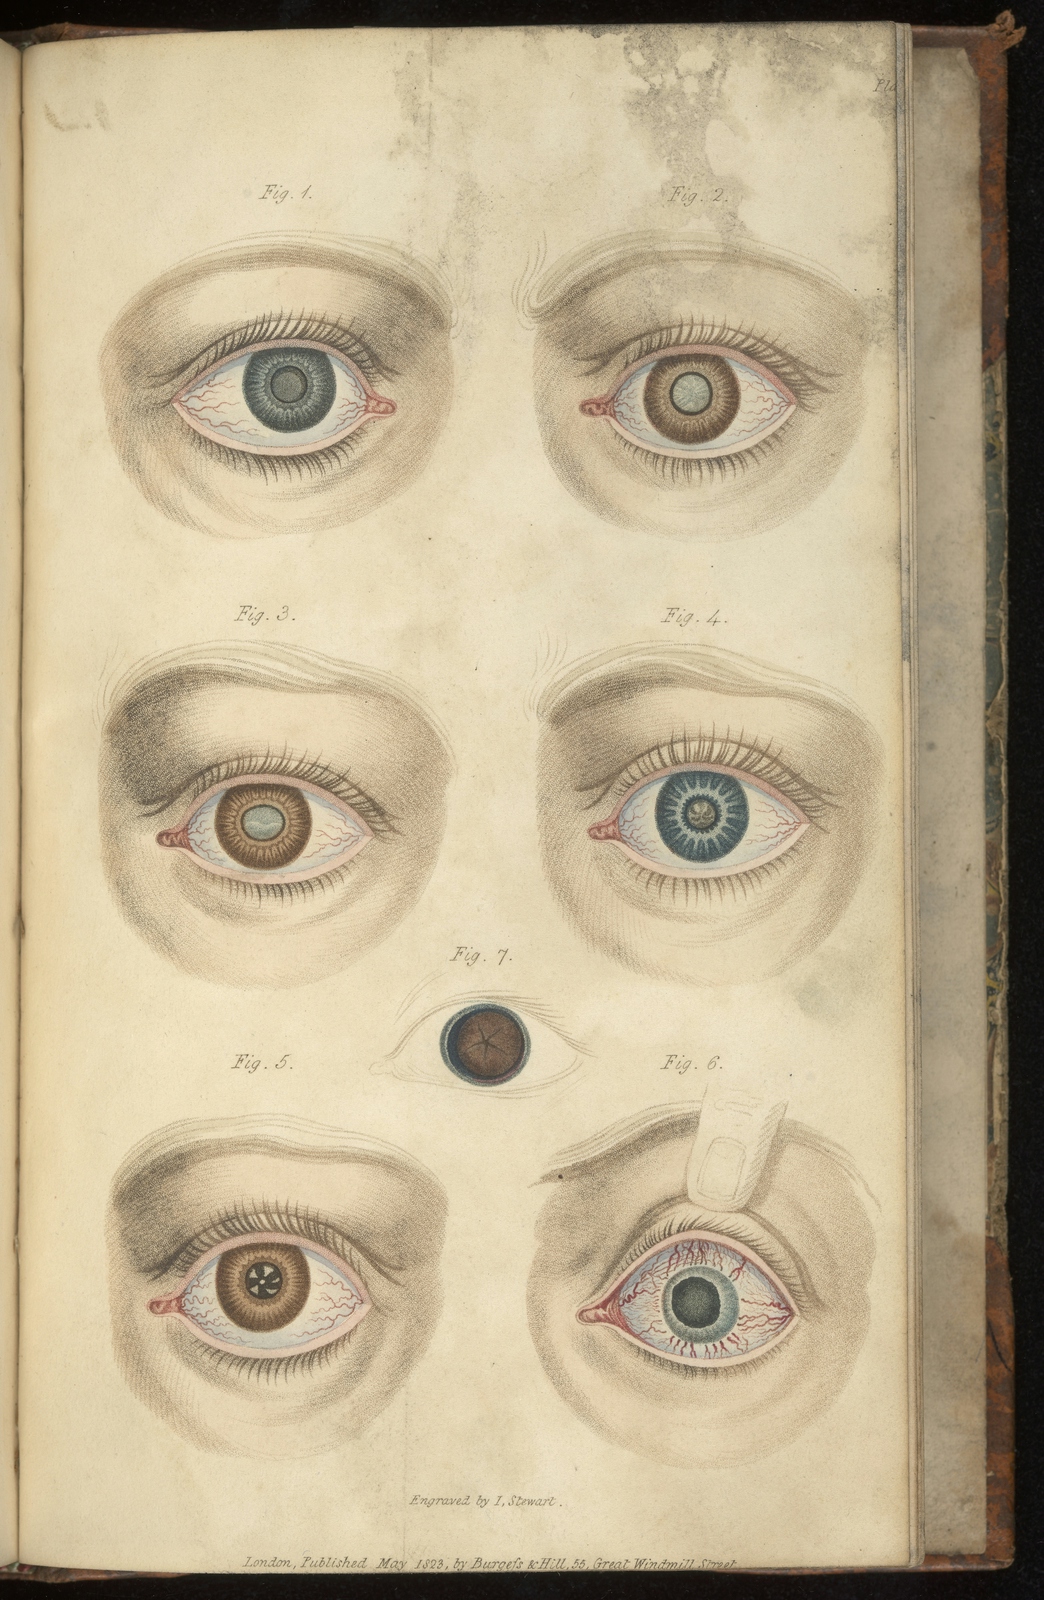 Colour engravings of problems with the eye depicting unusual irises and corneas, for instance with zig-zag lines or clouding.